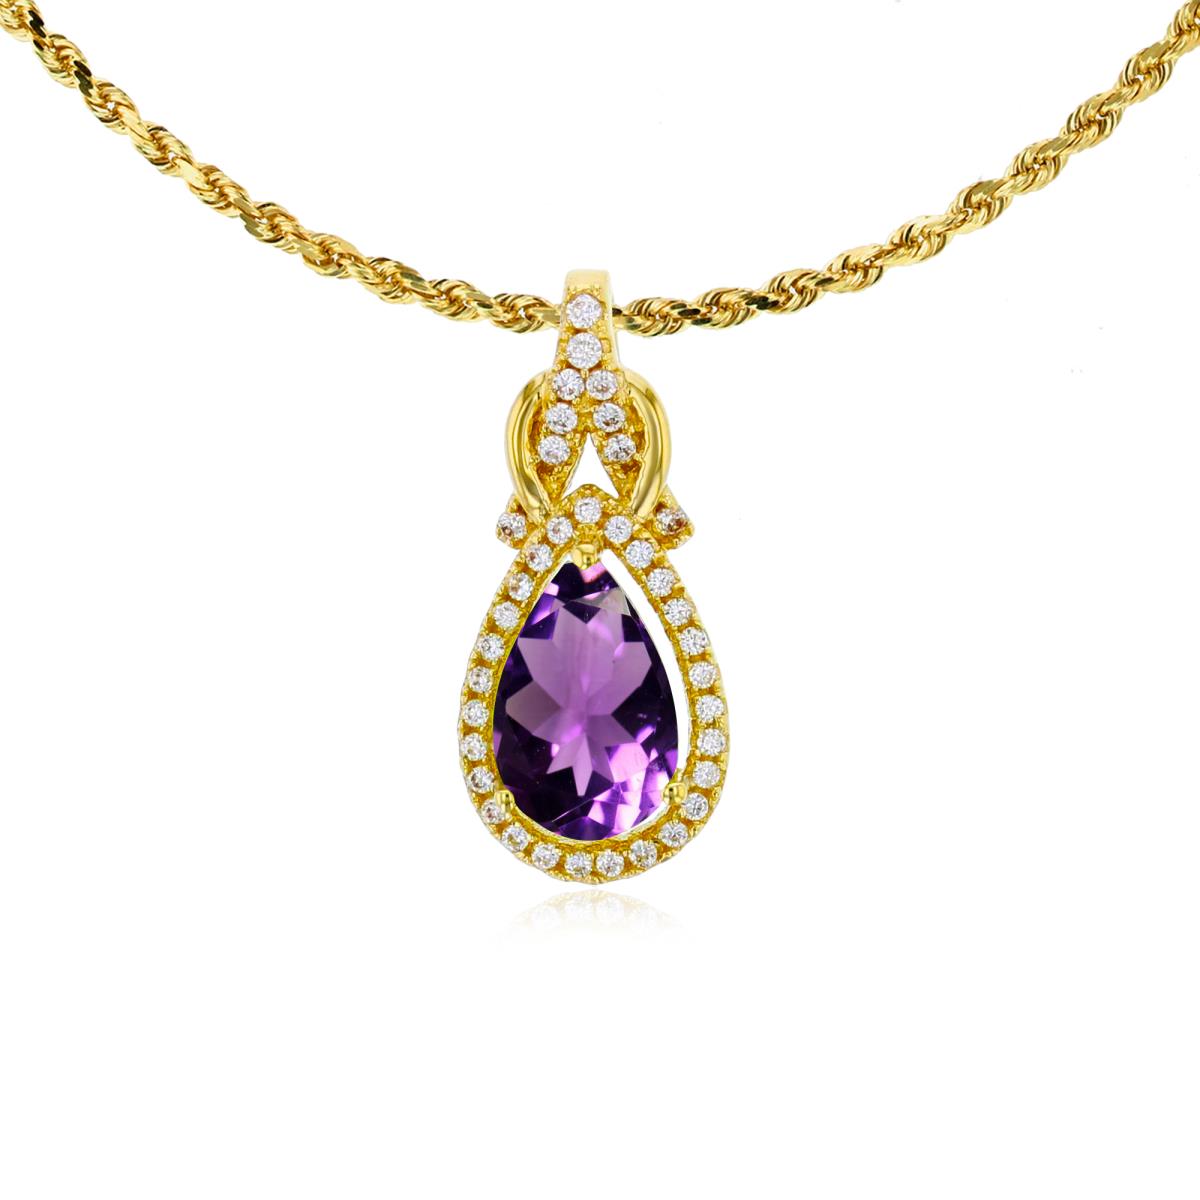 14K Yellow Gold 8x5mm Pear Cut Amethyst & 0.11 CTTW Rnd Diamond Knot 18" Rope Chain Necklace